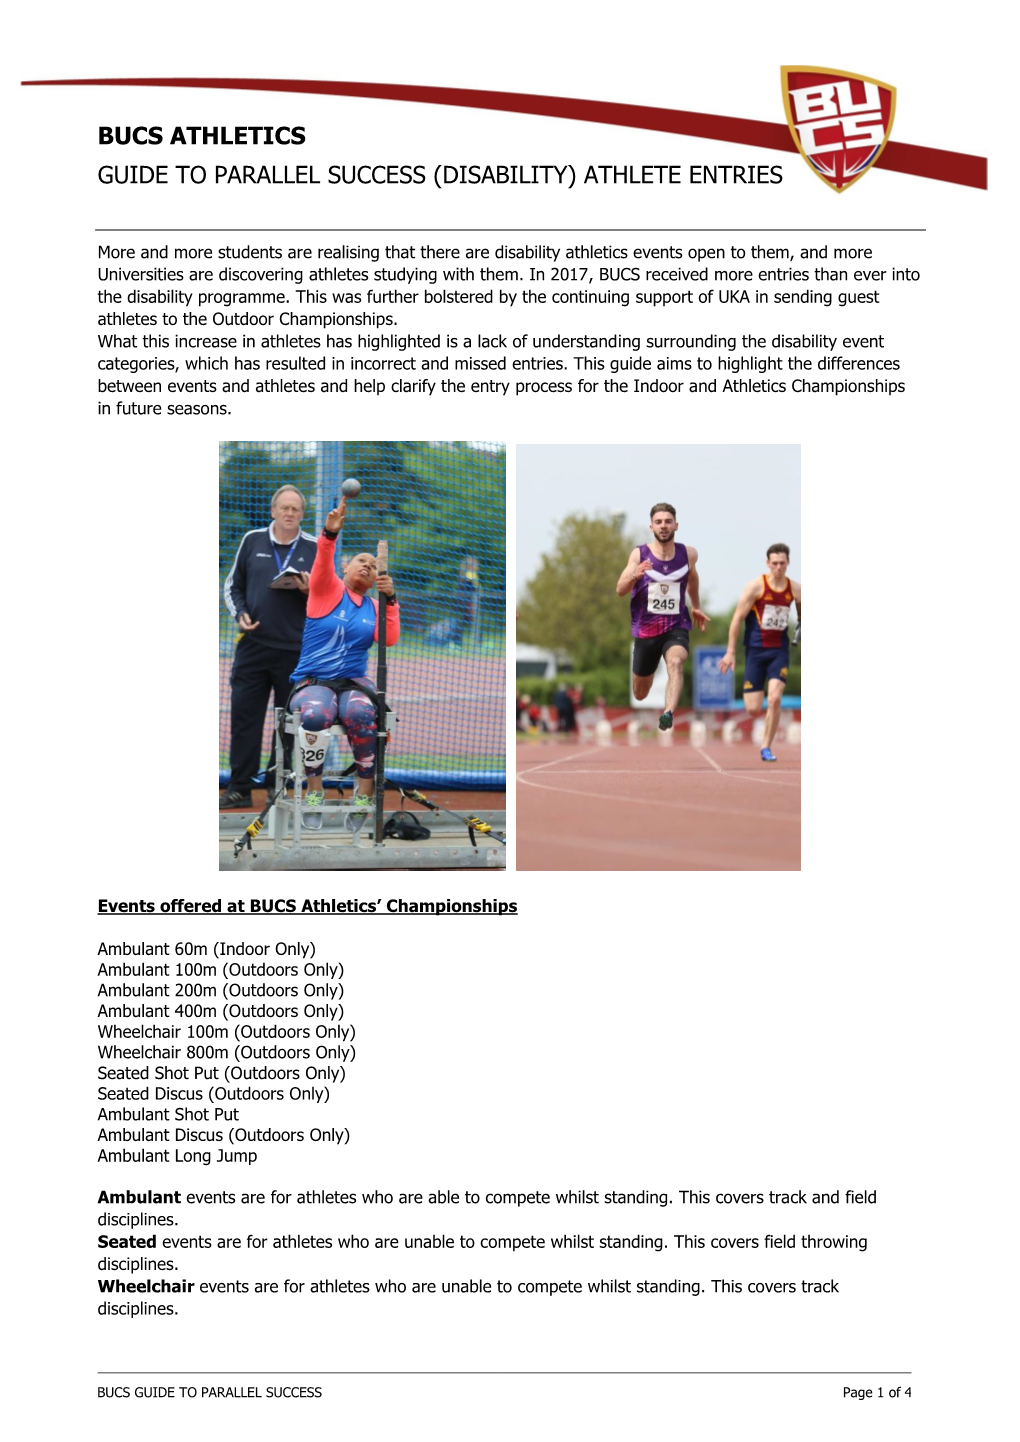 Bucs Athletics Guide to Parallel Success (Disability) Athlete Entries